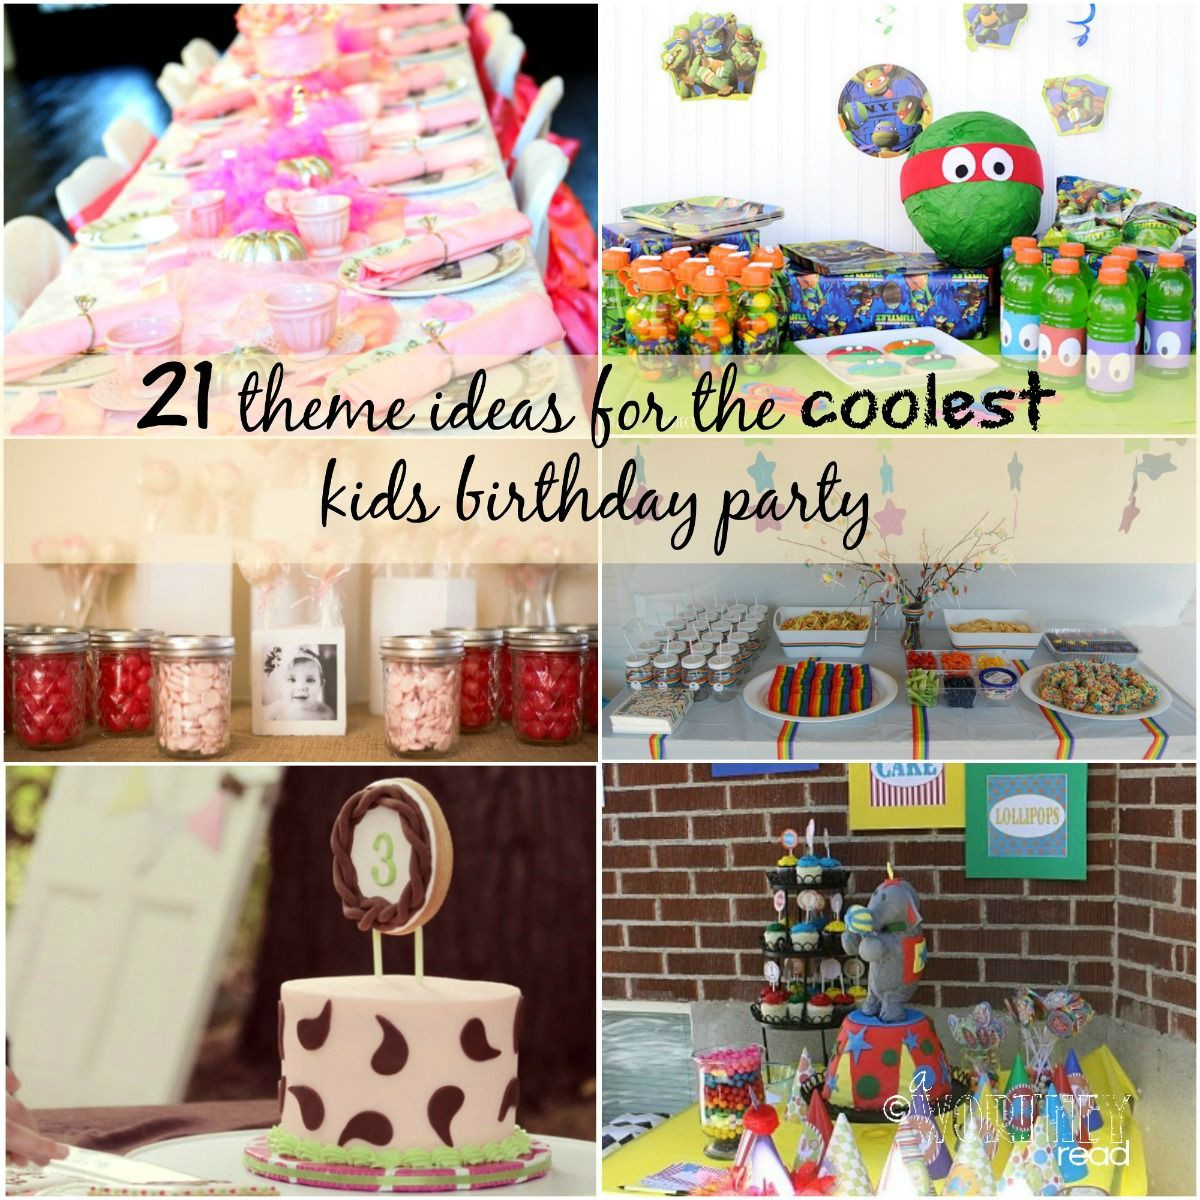 21St Birthday Party Ideas At Home
 21 Theme Ideas for the Coolest Kids Birthday Party